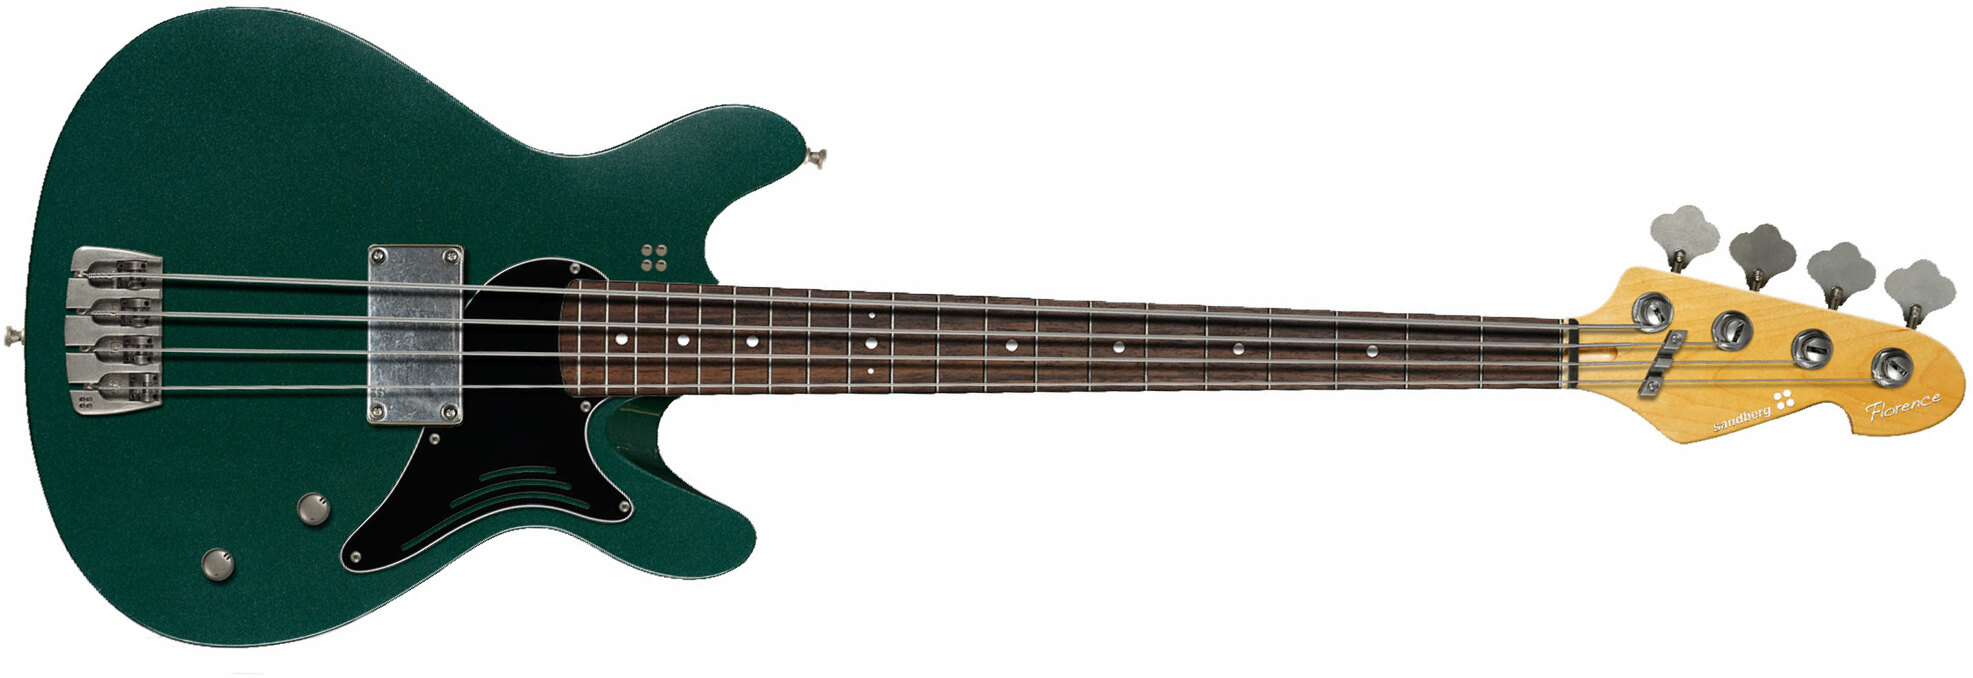 Sandberg Florence Bass 4c Rw - Soft Aged British Green - Basse Électrique Solid Body - Main picture